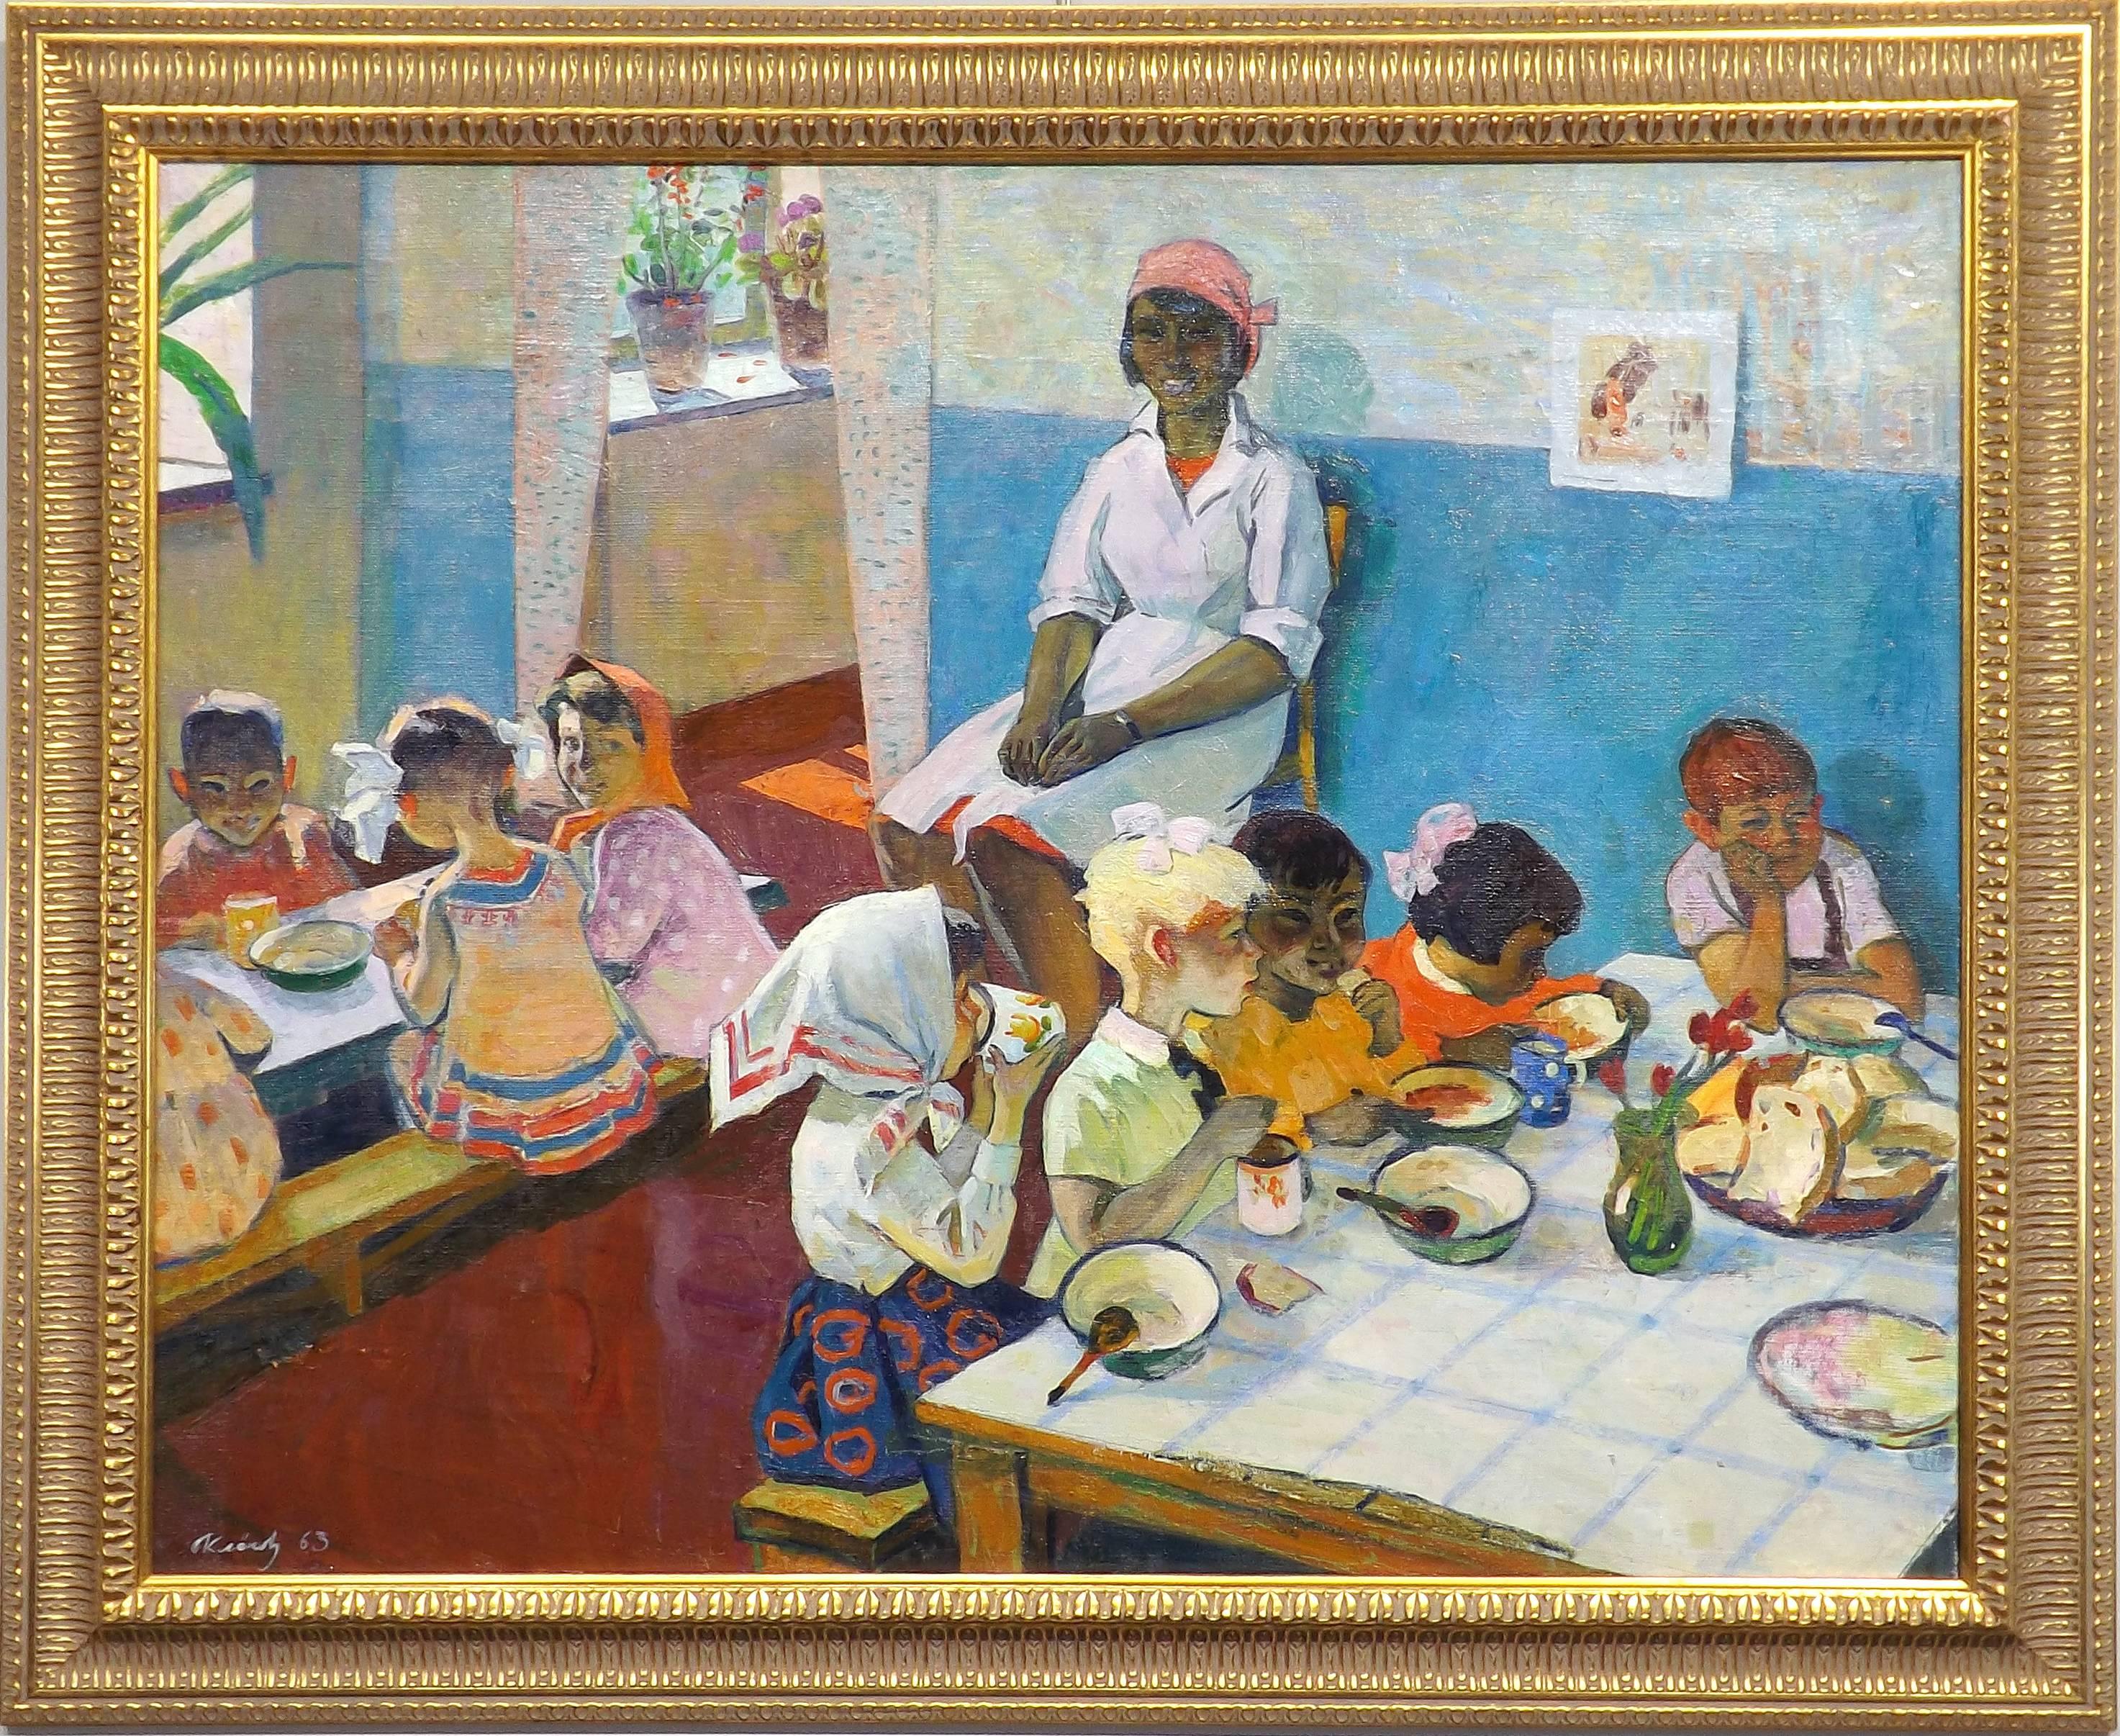 A wonderful painting of group of children having lunch at a communal school while being watched by their teacher, this painting by Russian artist Vladimir Klenov showcases the true feel of Social Realist art.

Klenov was born in 1932 in